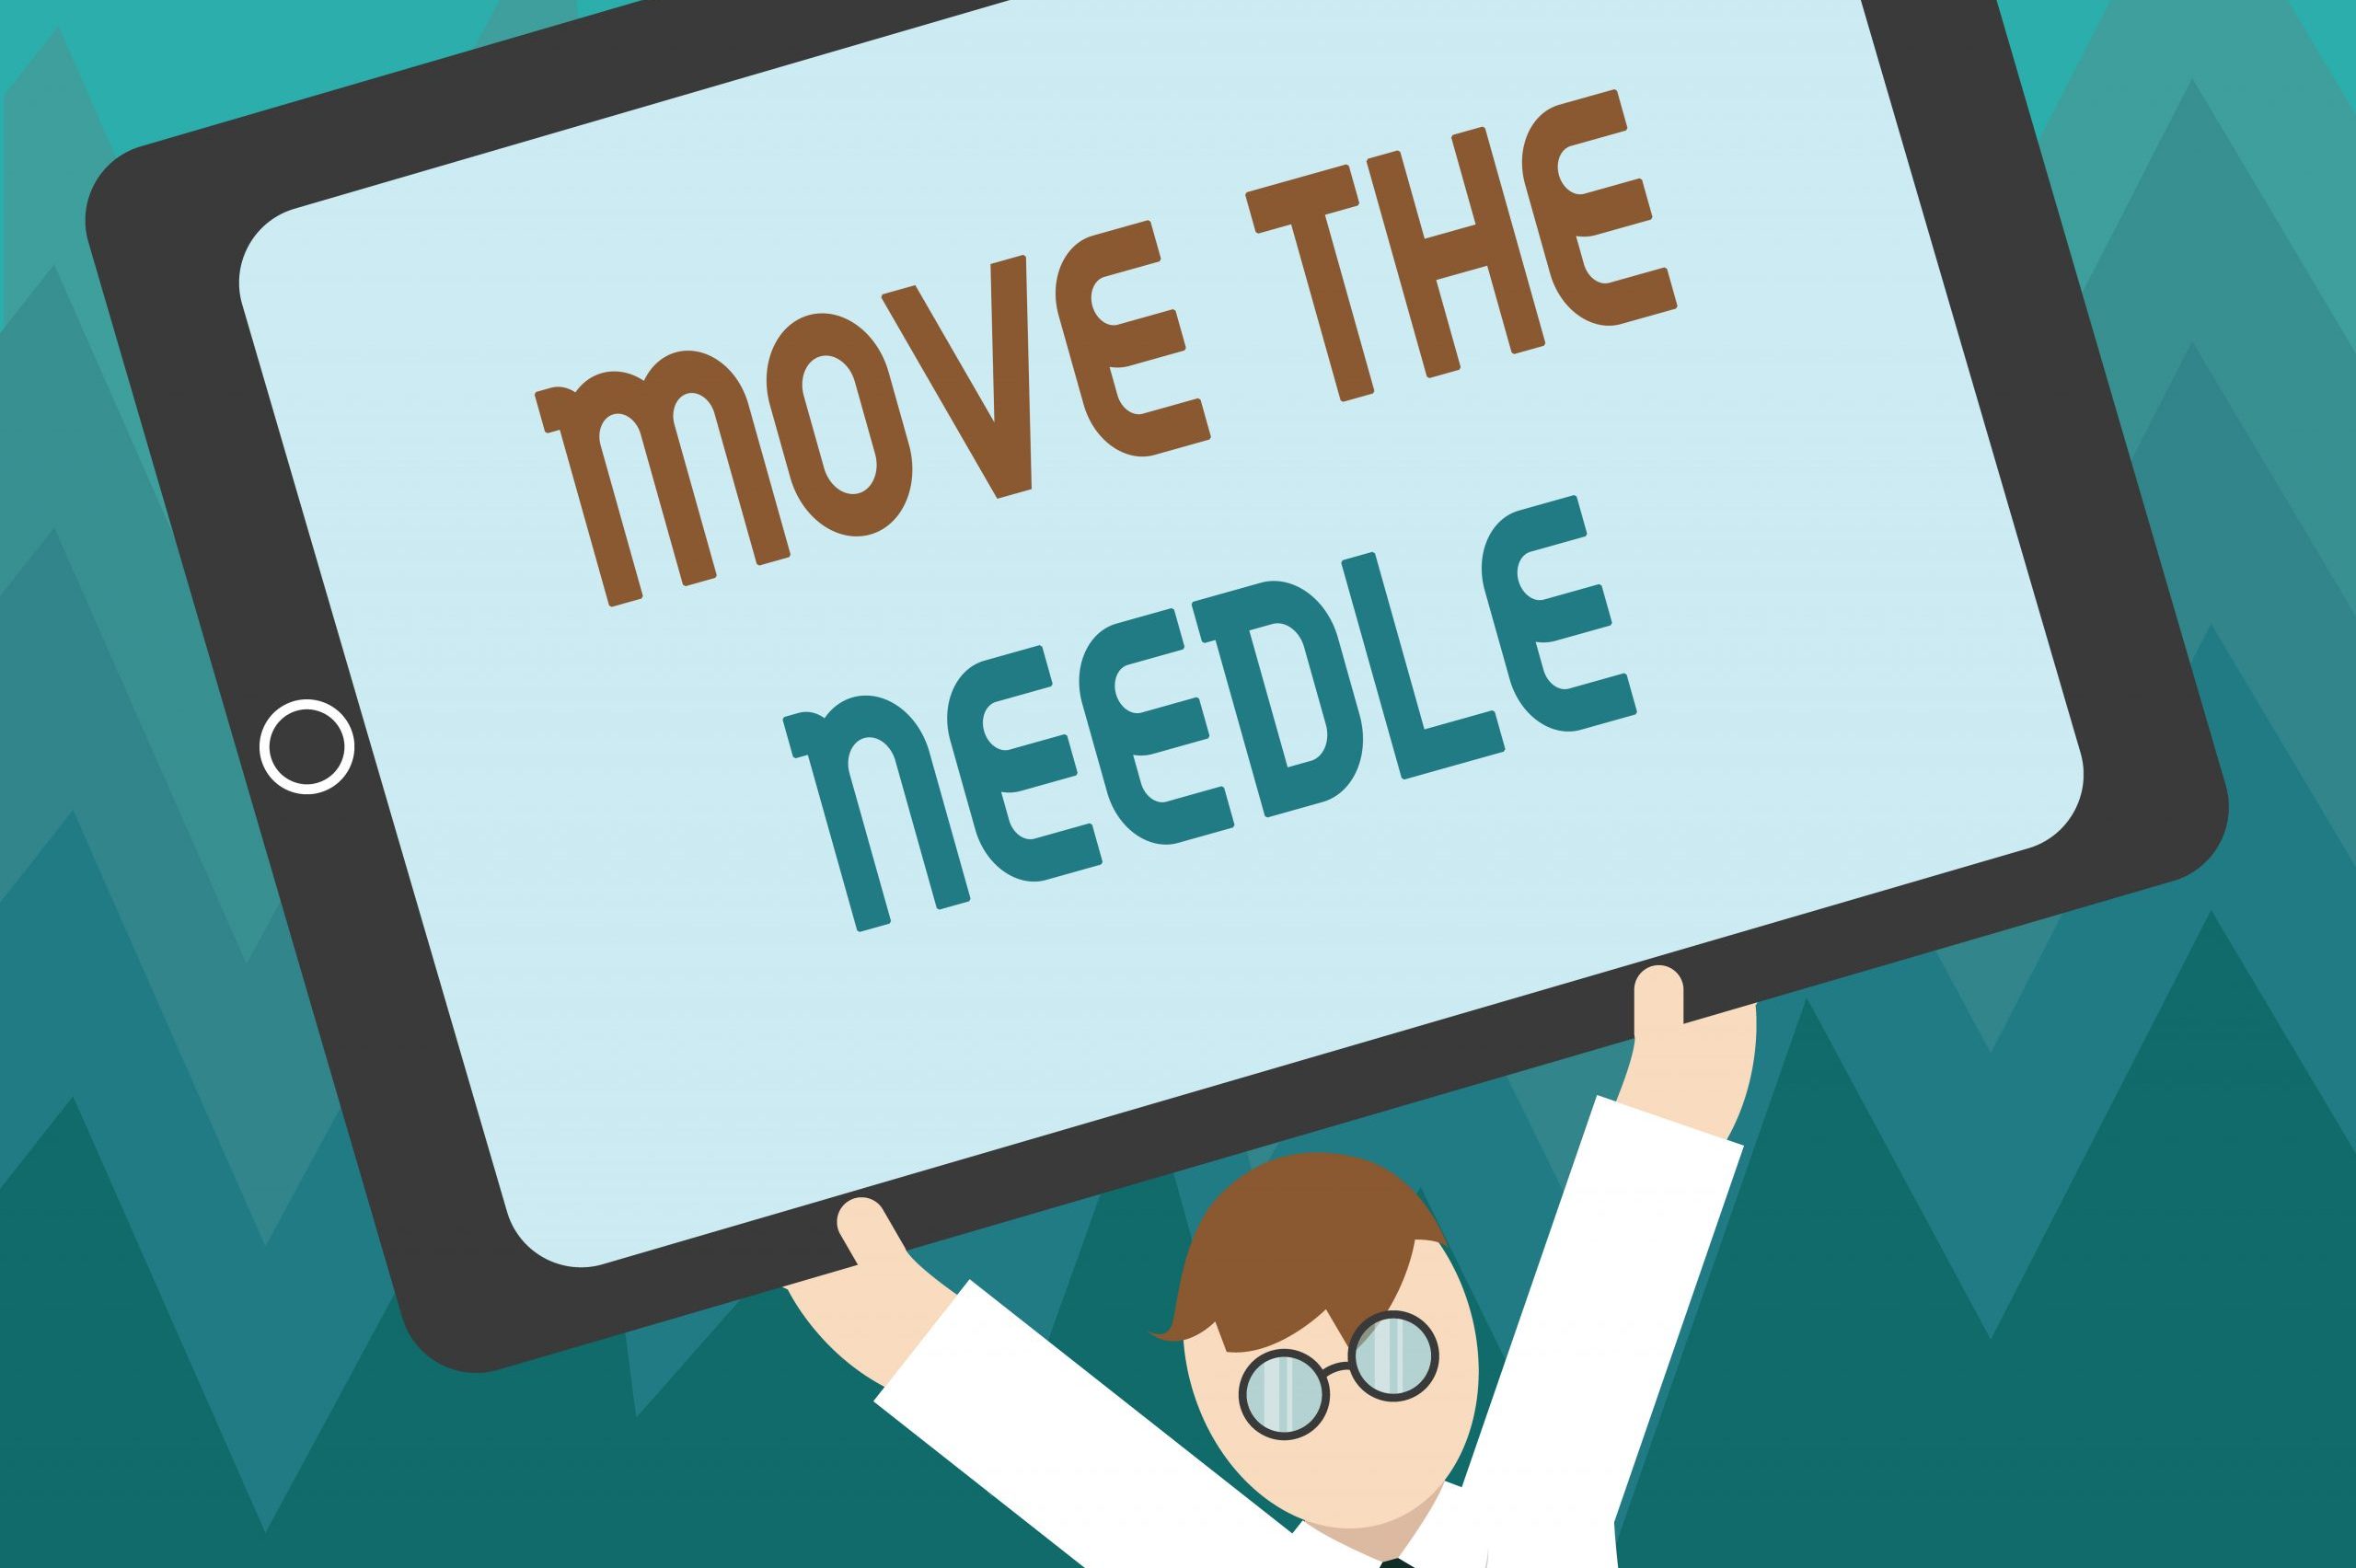 Move the needle. Make a notable difference in your business leveraging financial management tools.